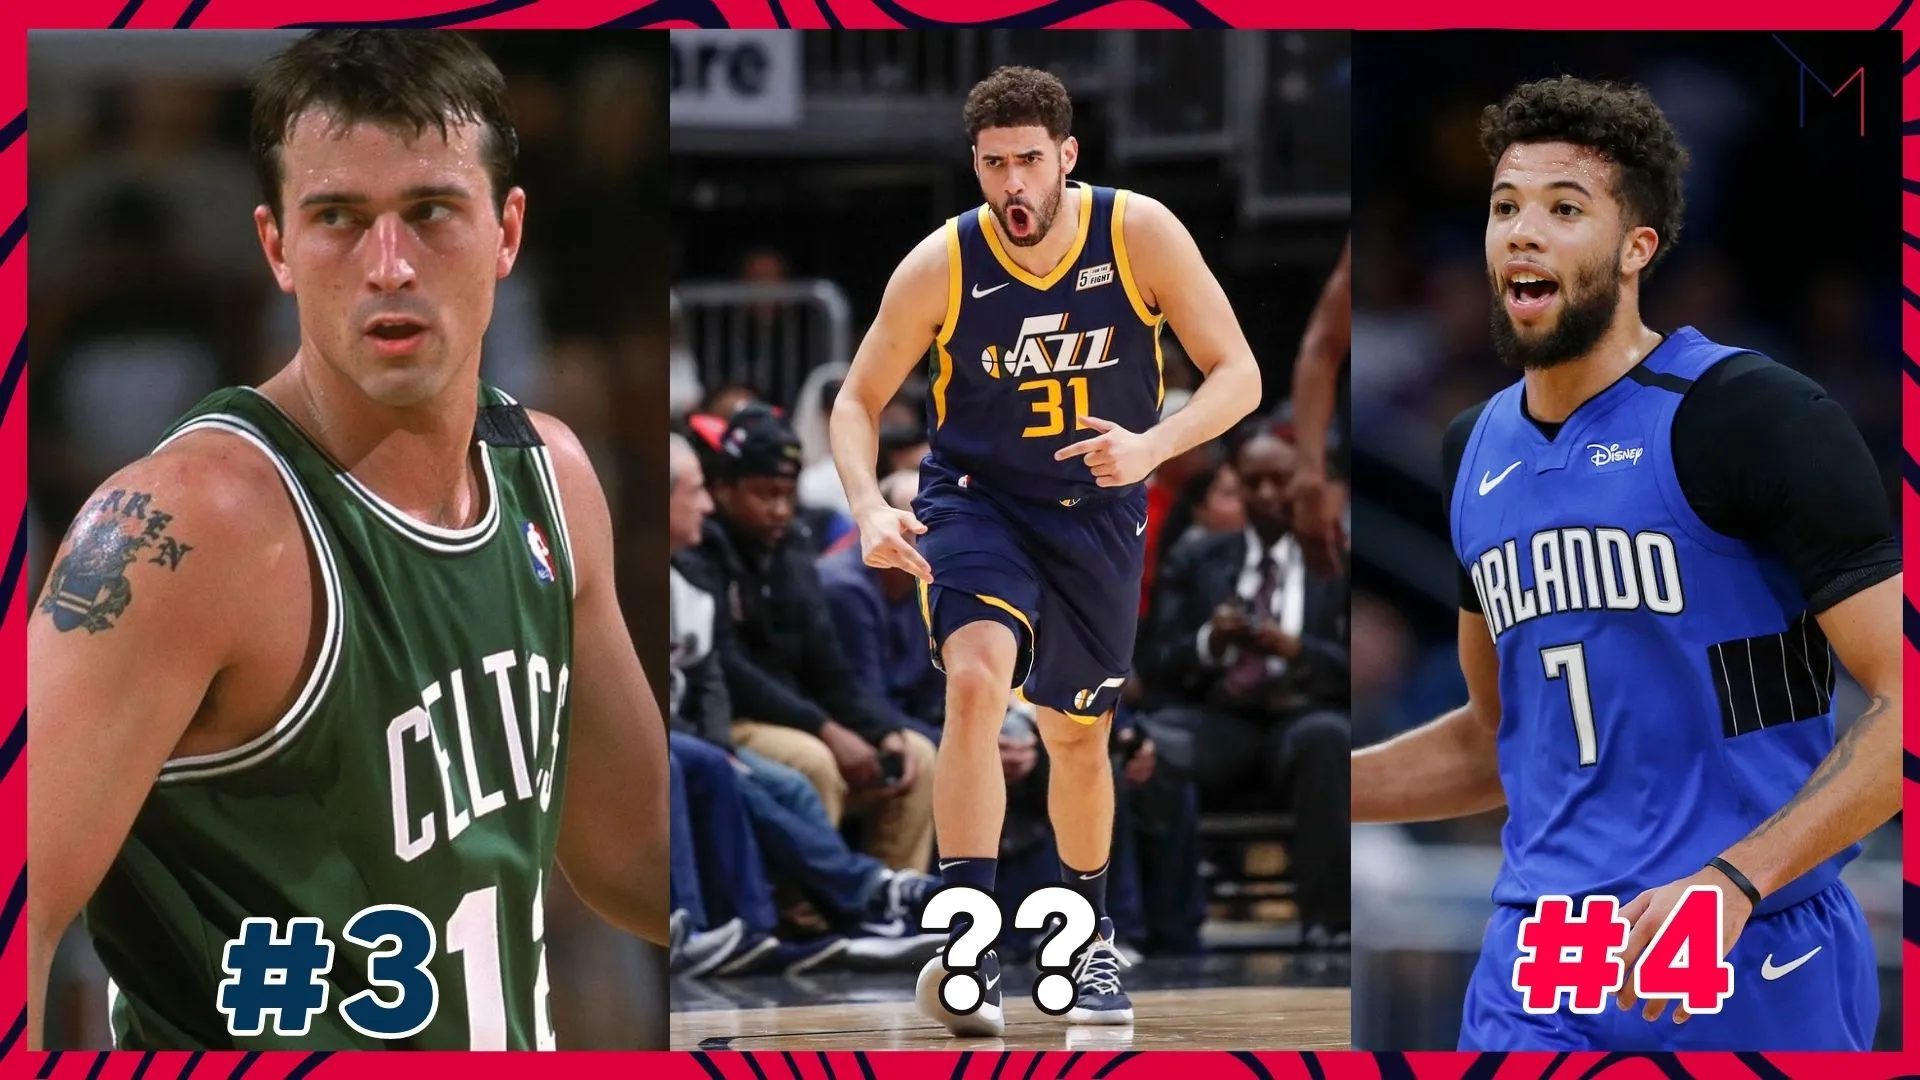 Top 10 most popular basketball players from Massachusetts - Famous NBA players from Massachusetts